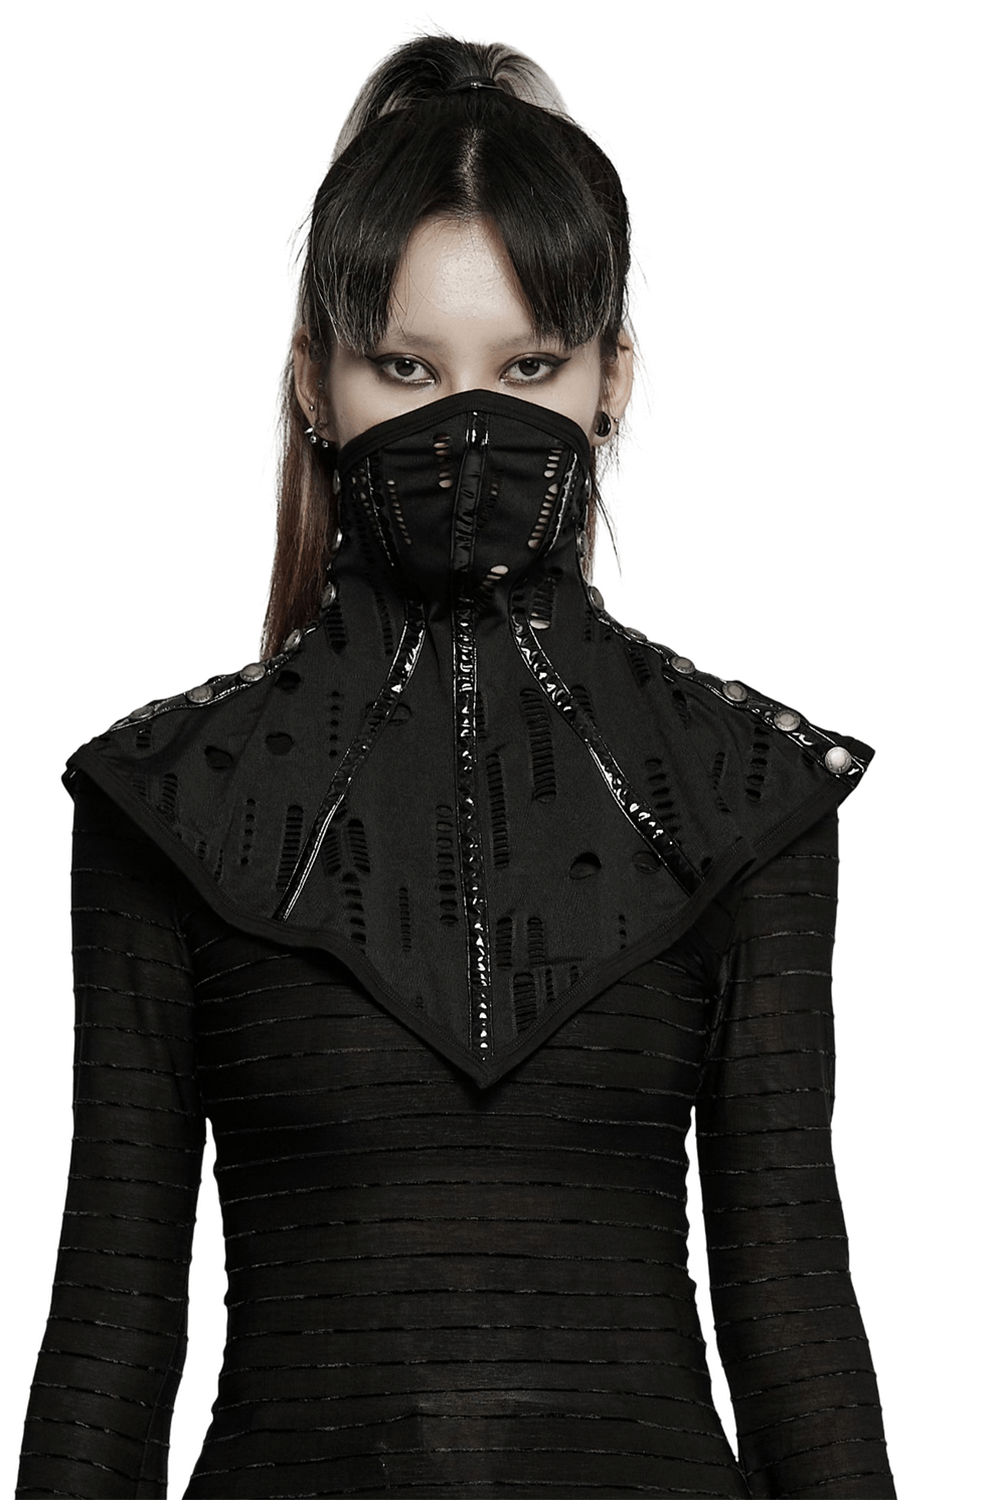 Goth Stylish Face Mask Collar with Buttons and Holes